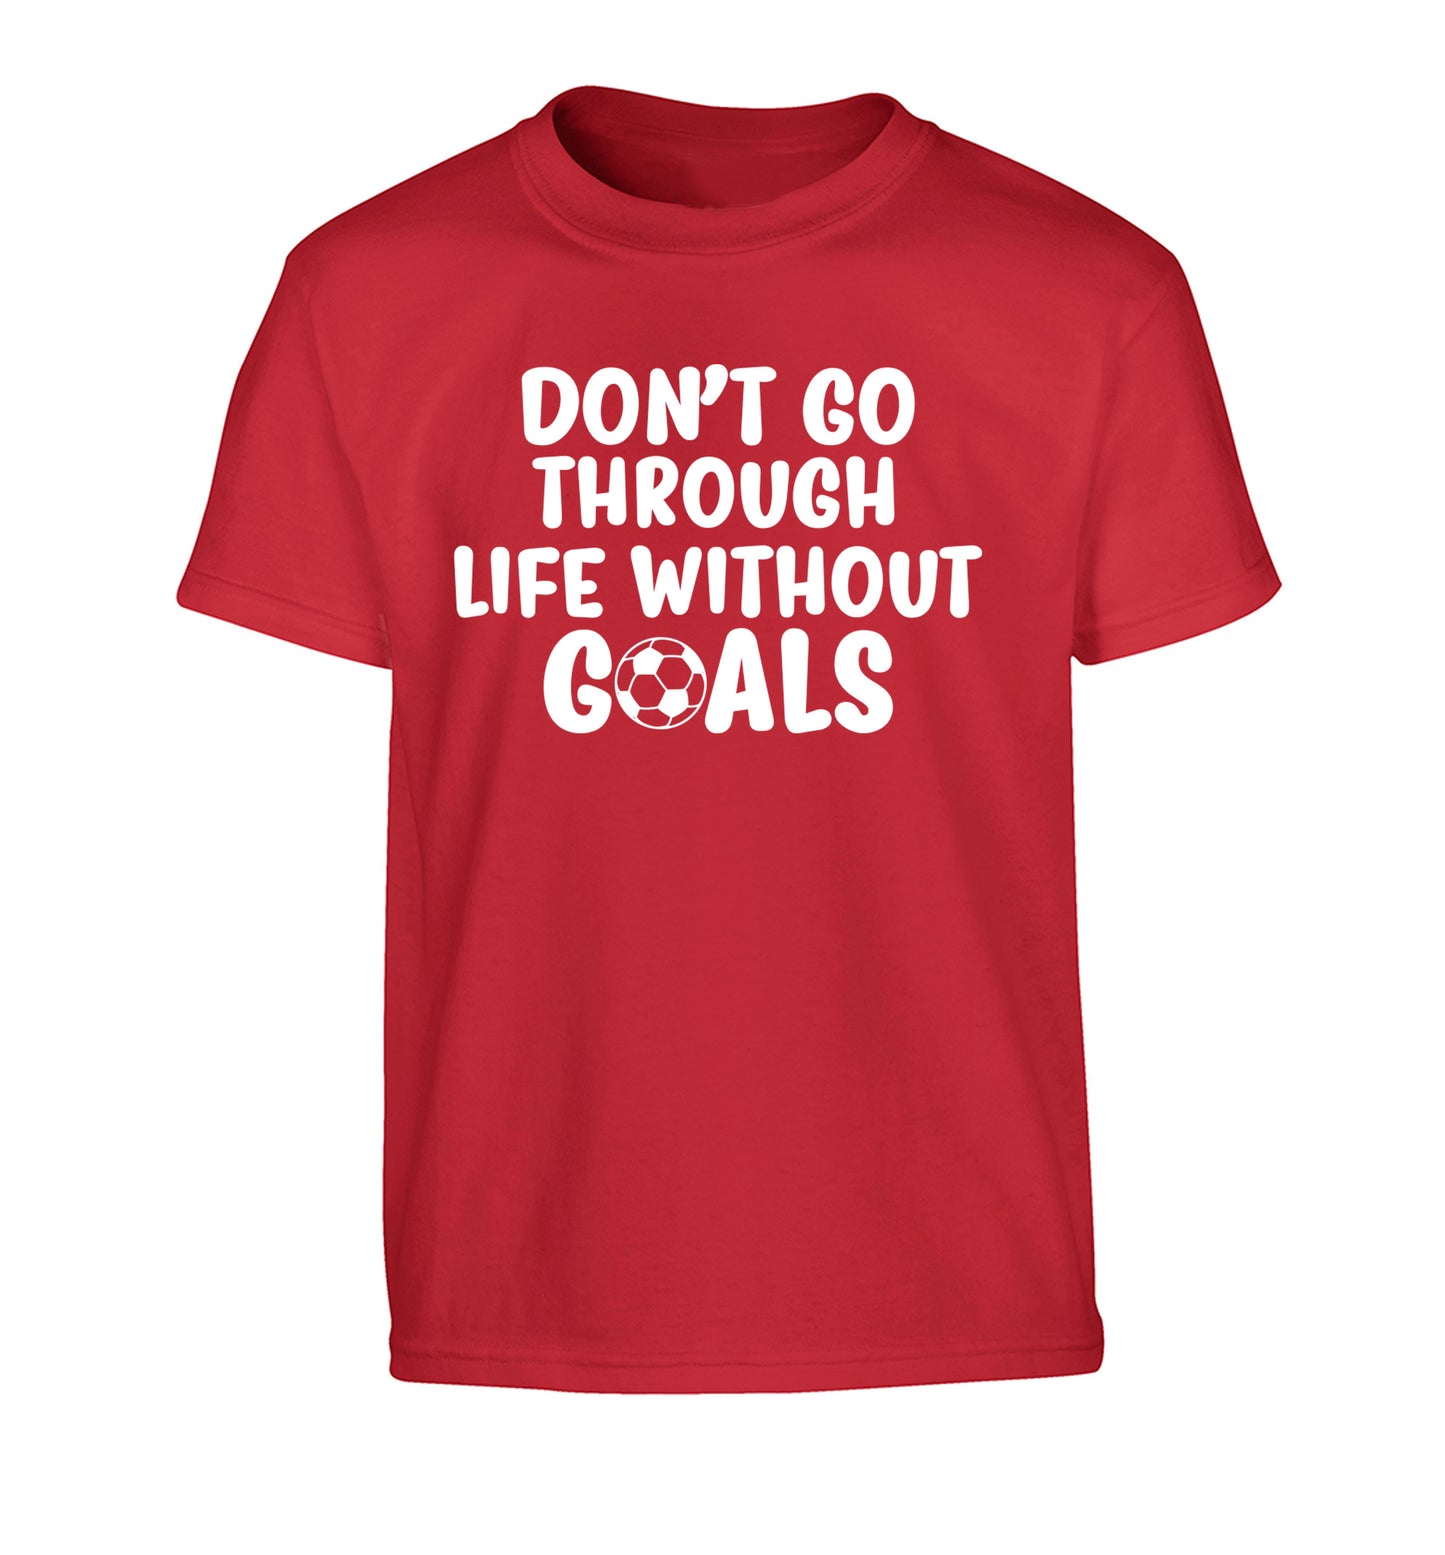 Don't go through life without goals Children's red Tshirt 12-14 Years